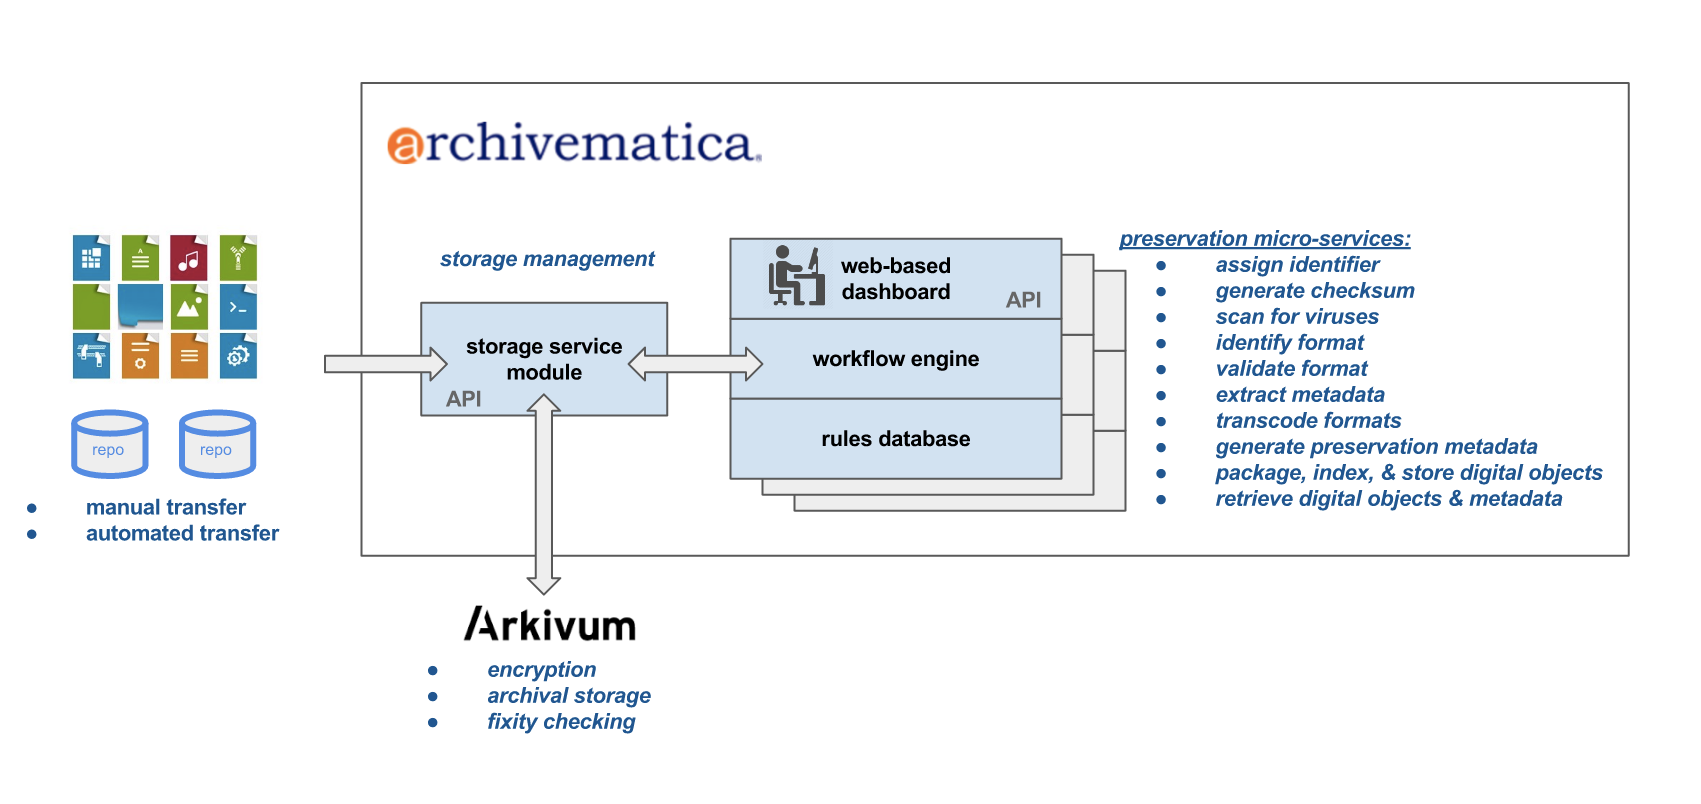 Current Archivematica-Arkivum functionality/integration